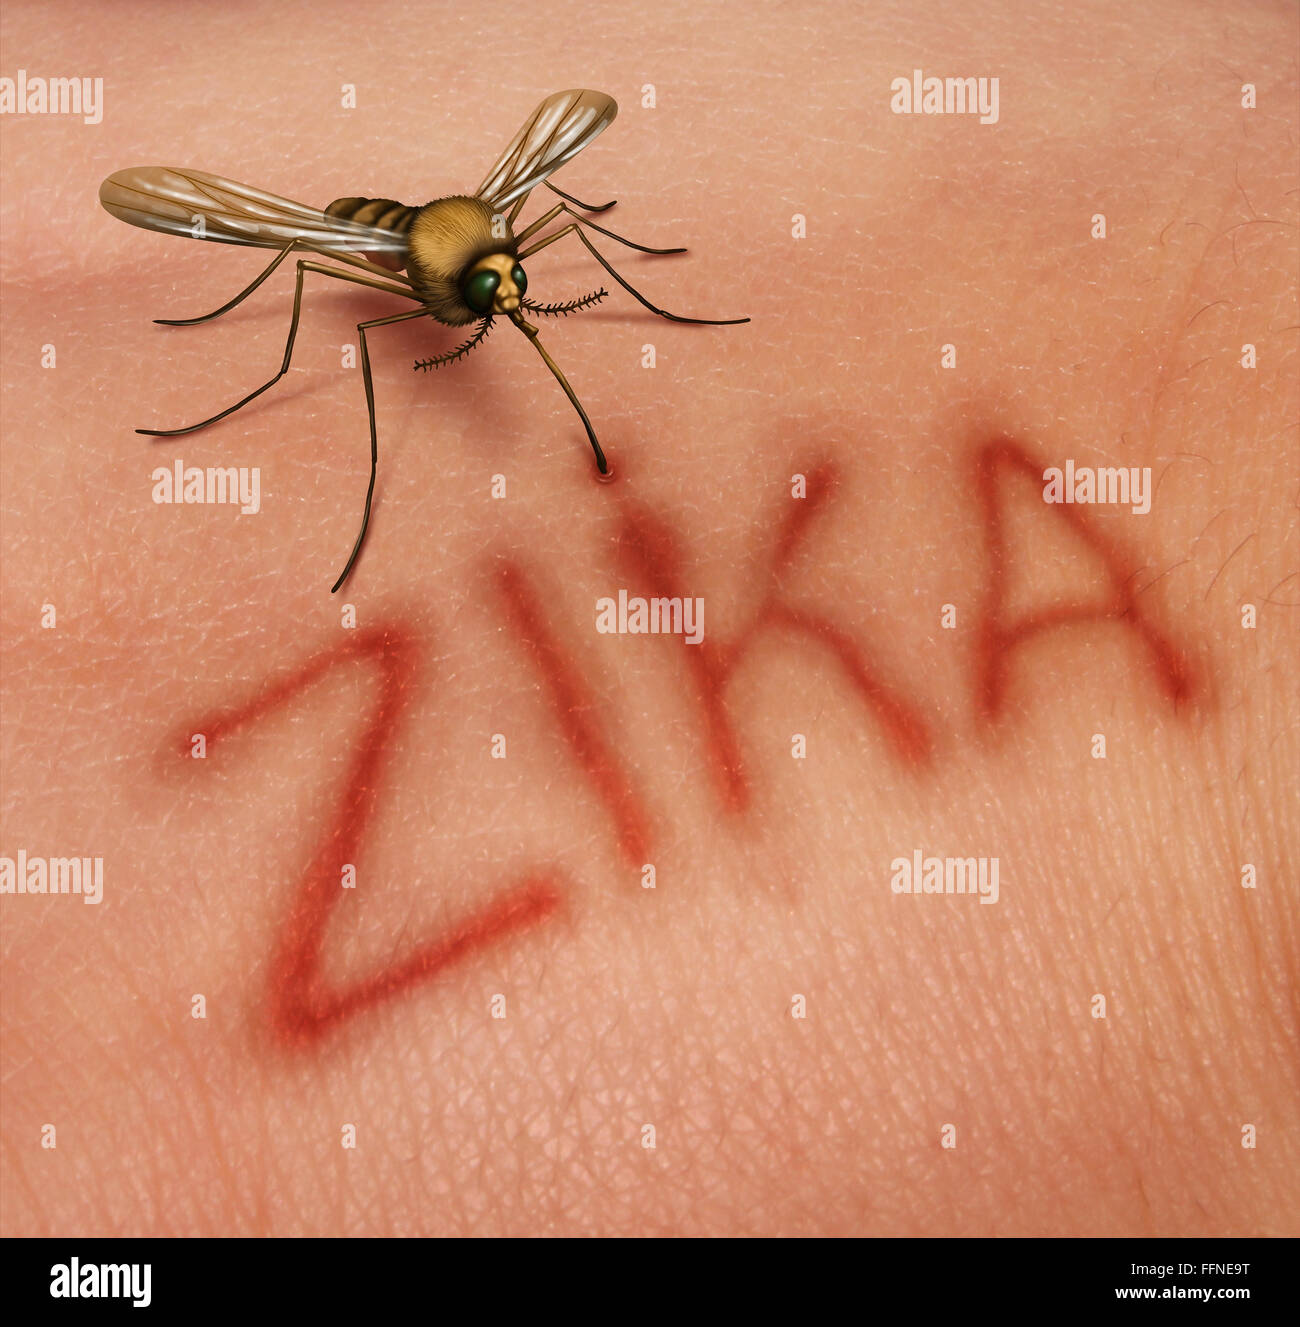 Zika disease concept as a virus risk symbol with a dangerous illness carrying mosquito forming text on human skin that represents the danger of transmitting infection through bug bites resulting in zika fever. Stock Photo